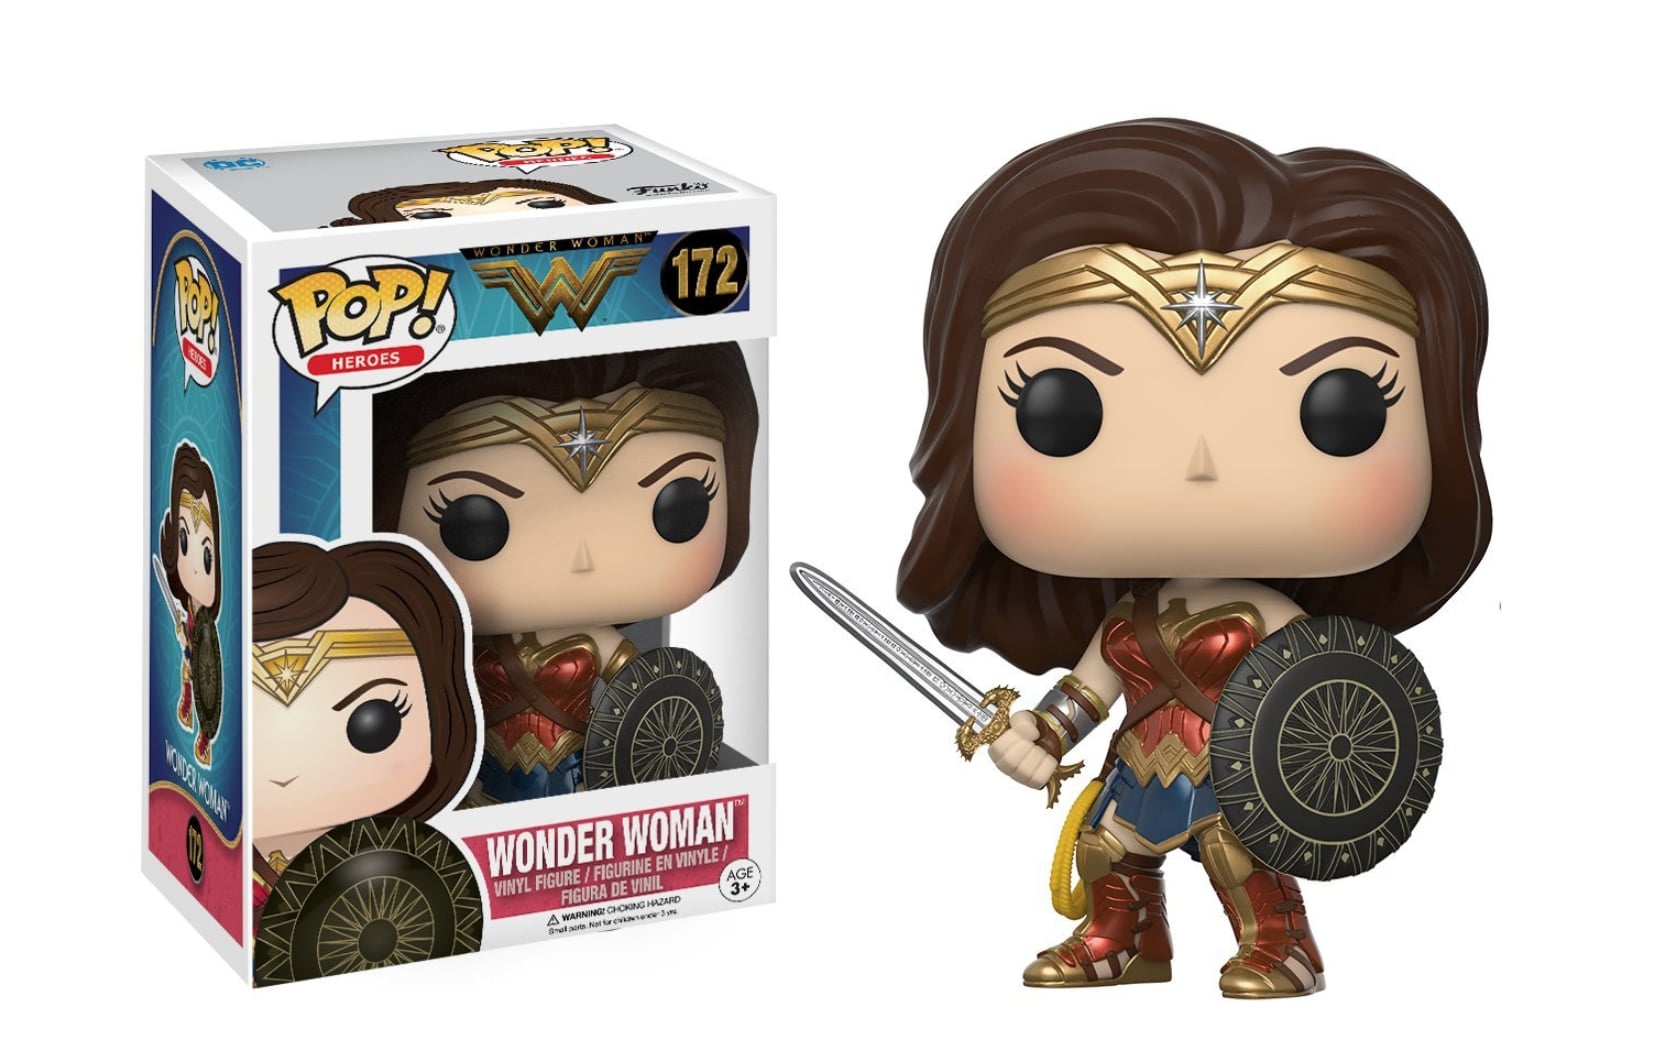 wonder woman gifts for her